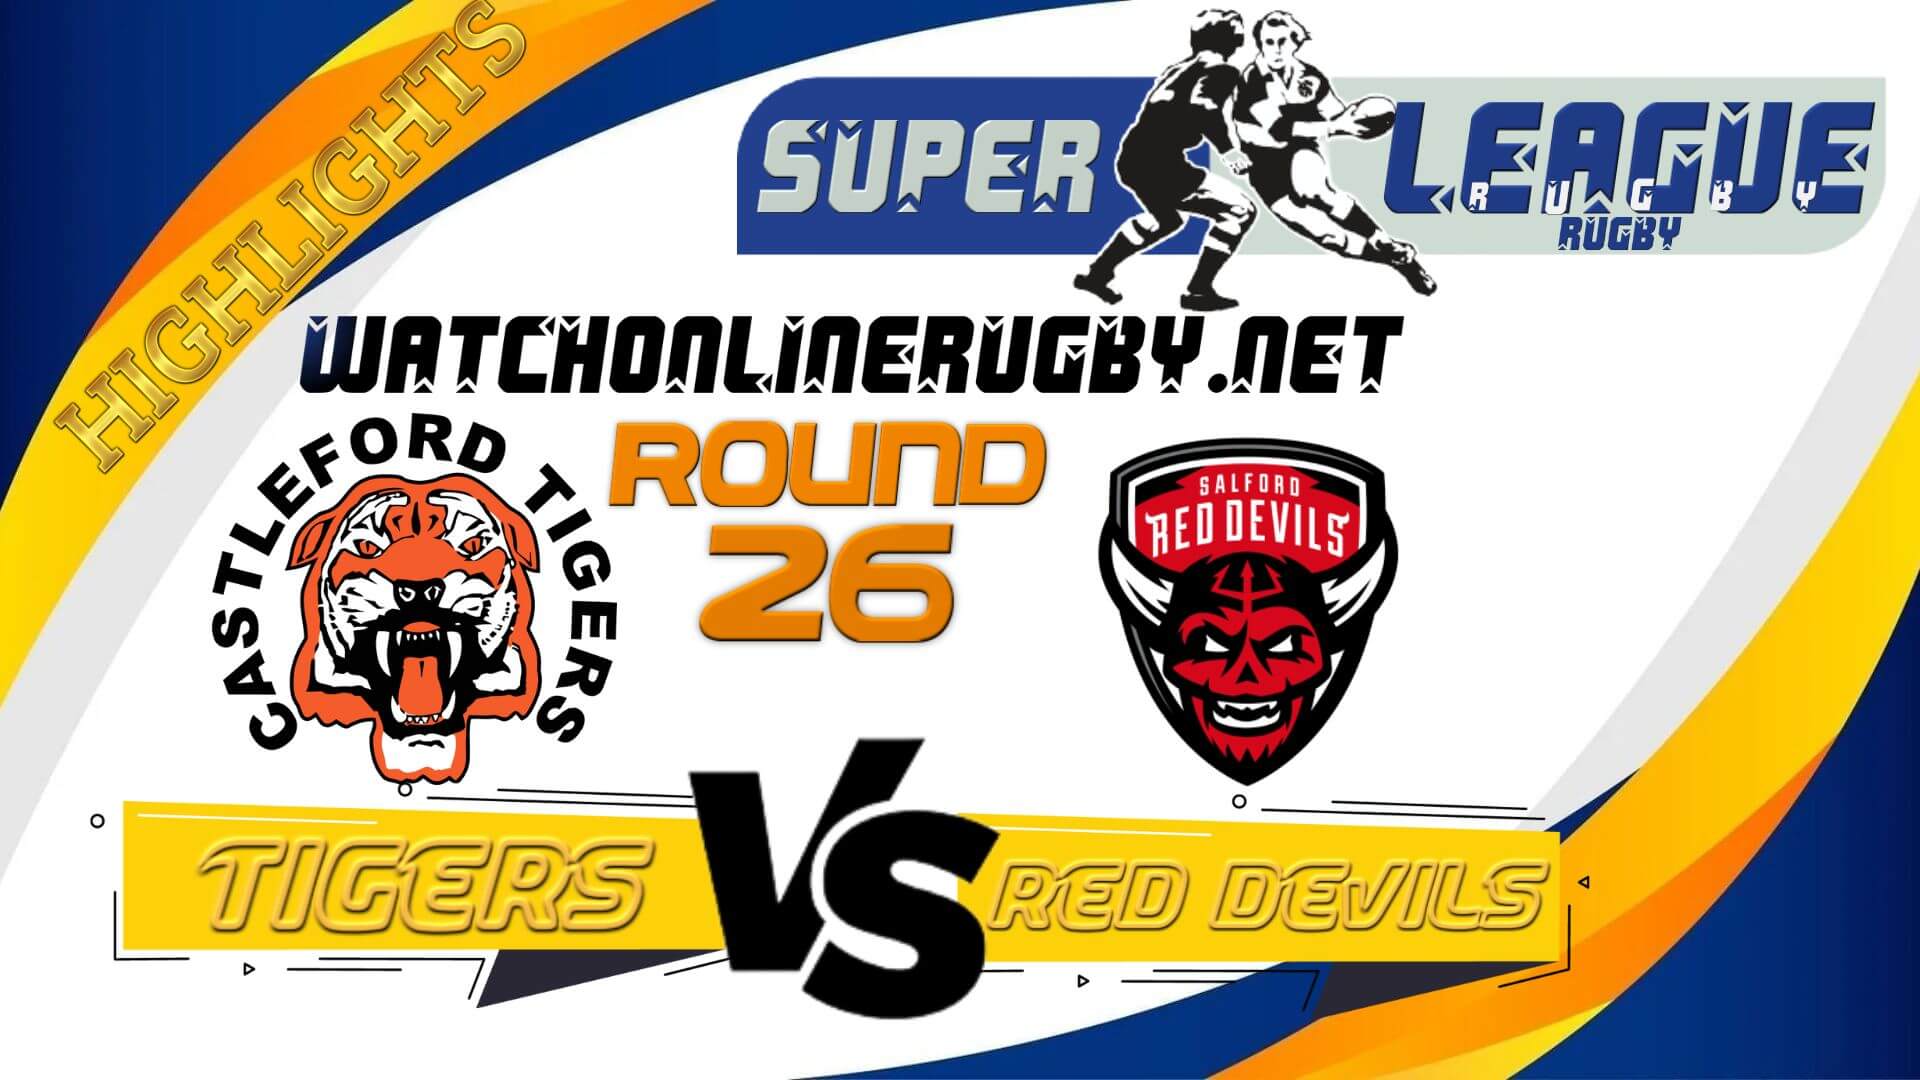 Castleford Tigers Vs Salford Red Devils Super League Rugby 2022 RD 26